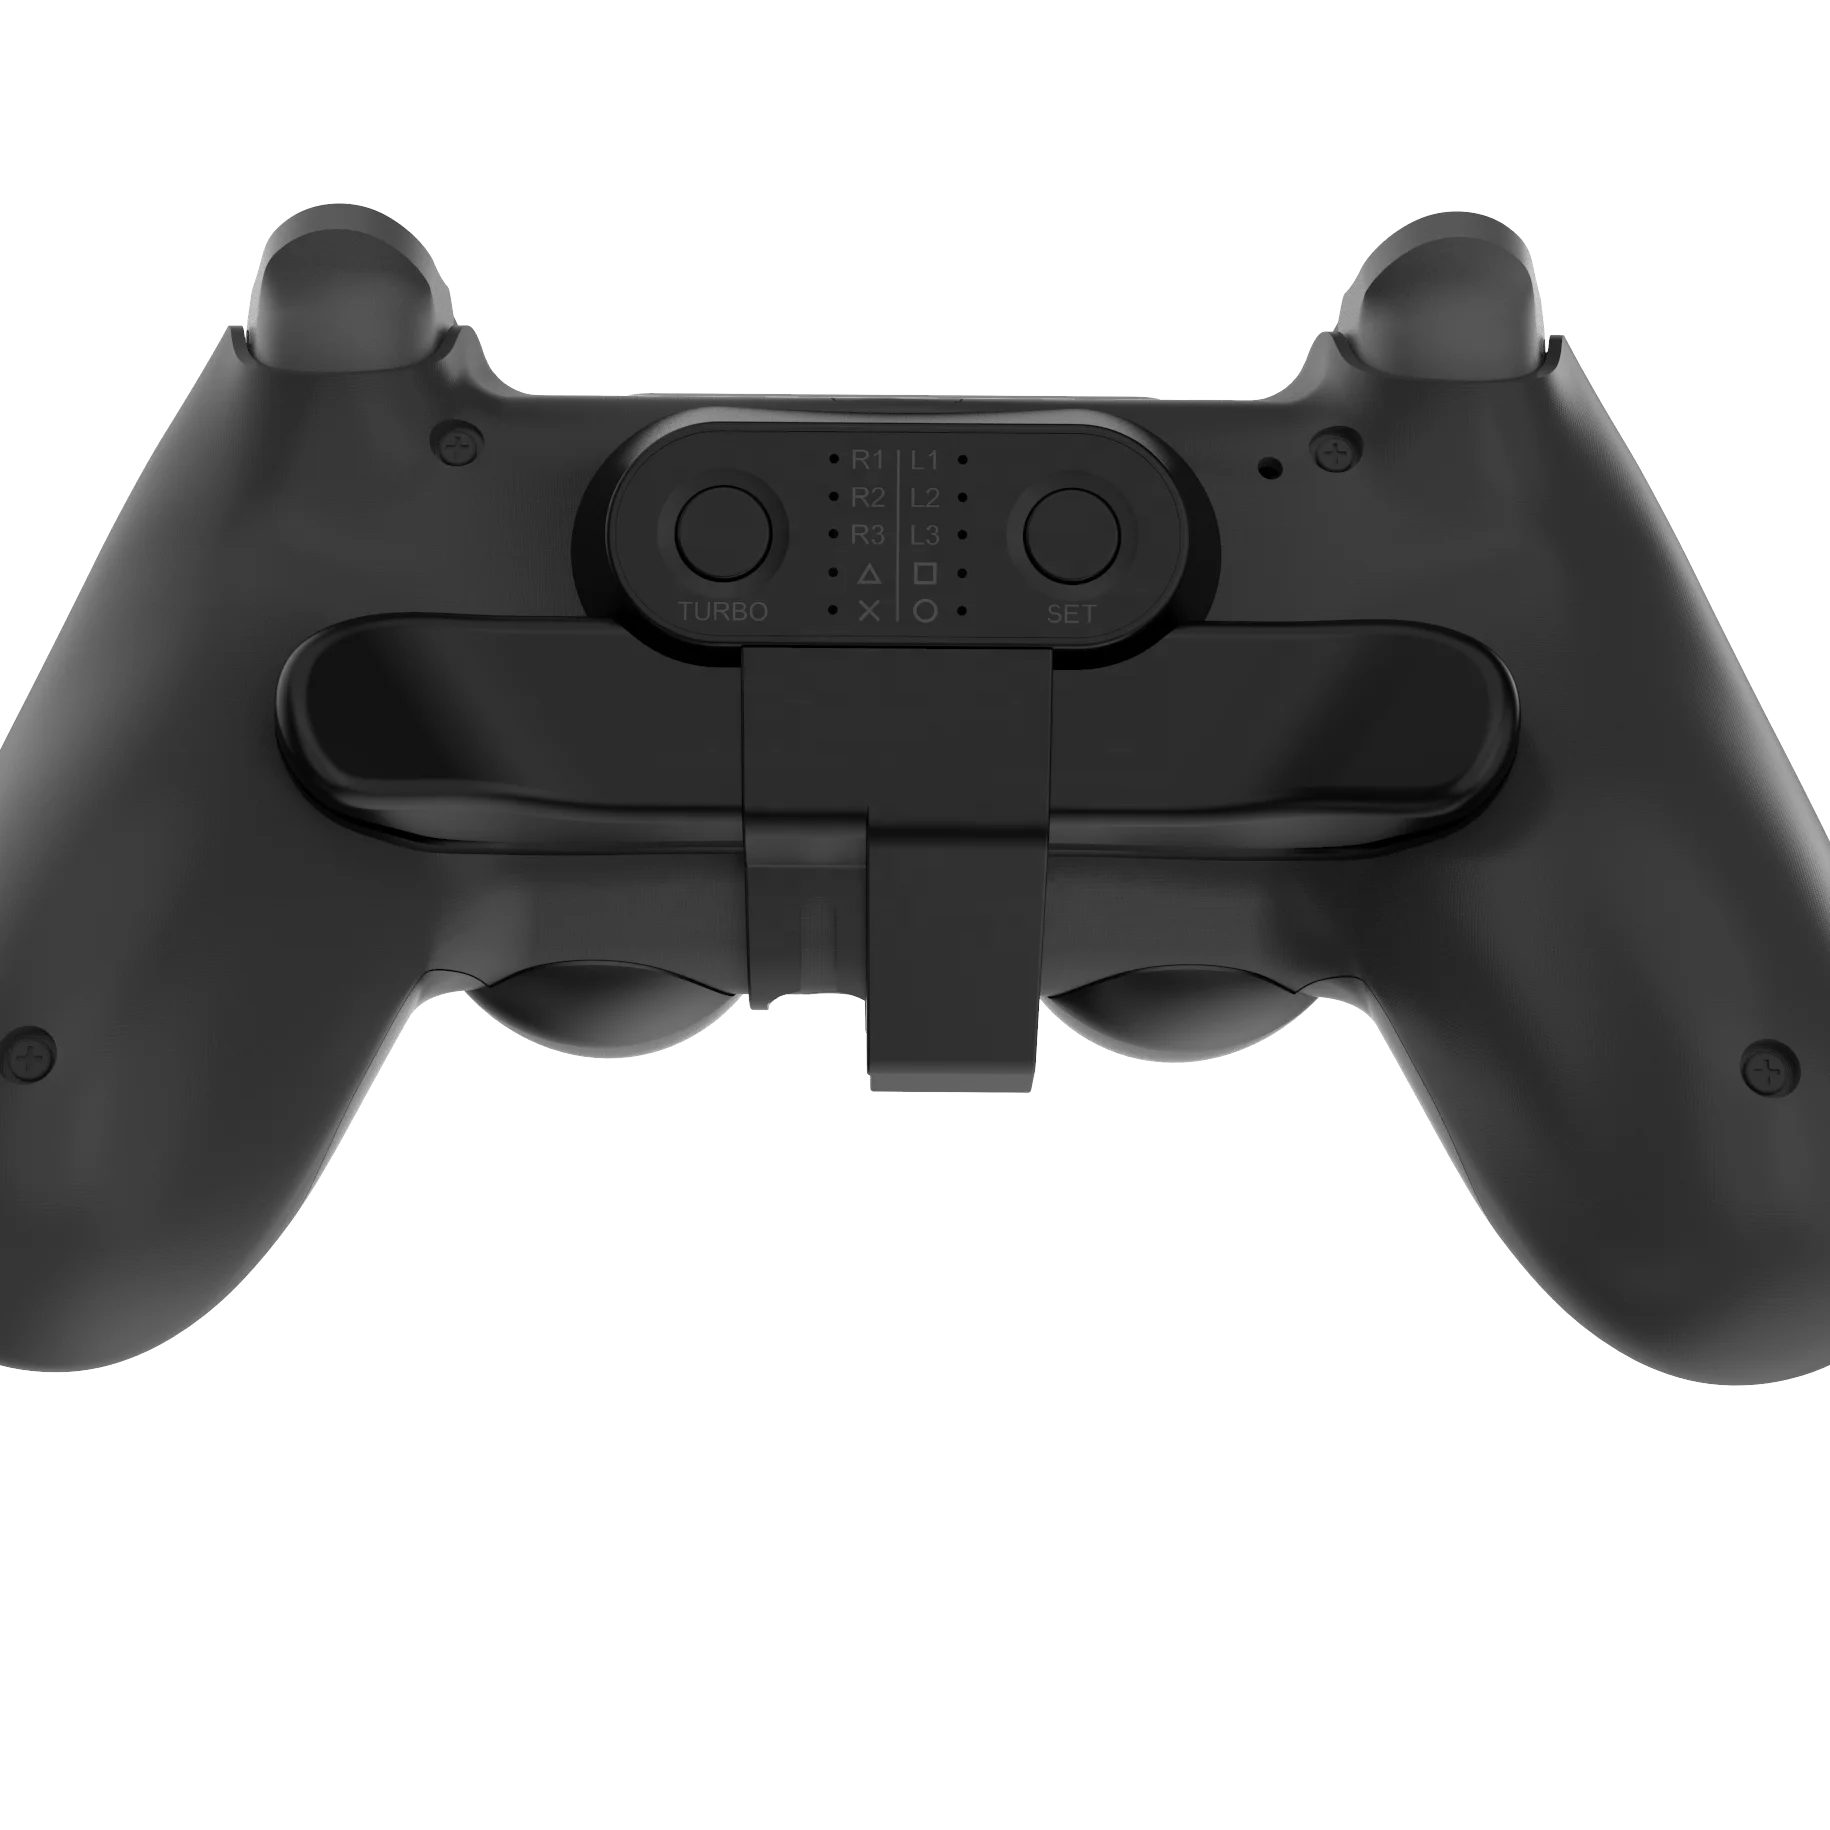 

For Ps4 Controller Paddles extended gamepad back button Attachment for Ps4 Joystick rear button With Turbo Key